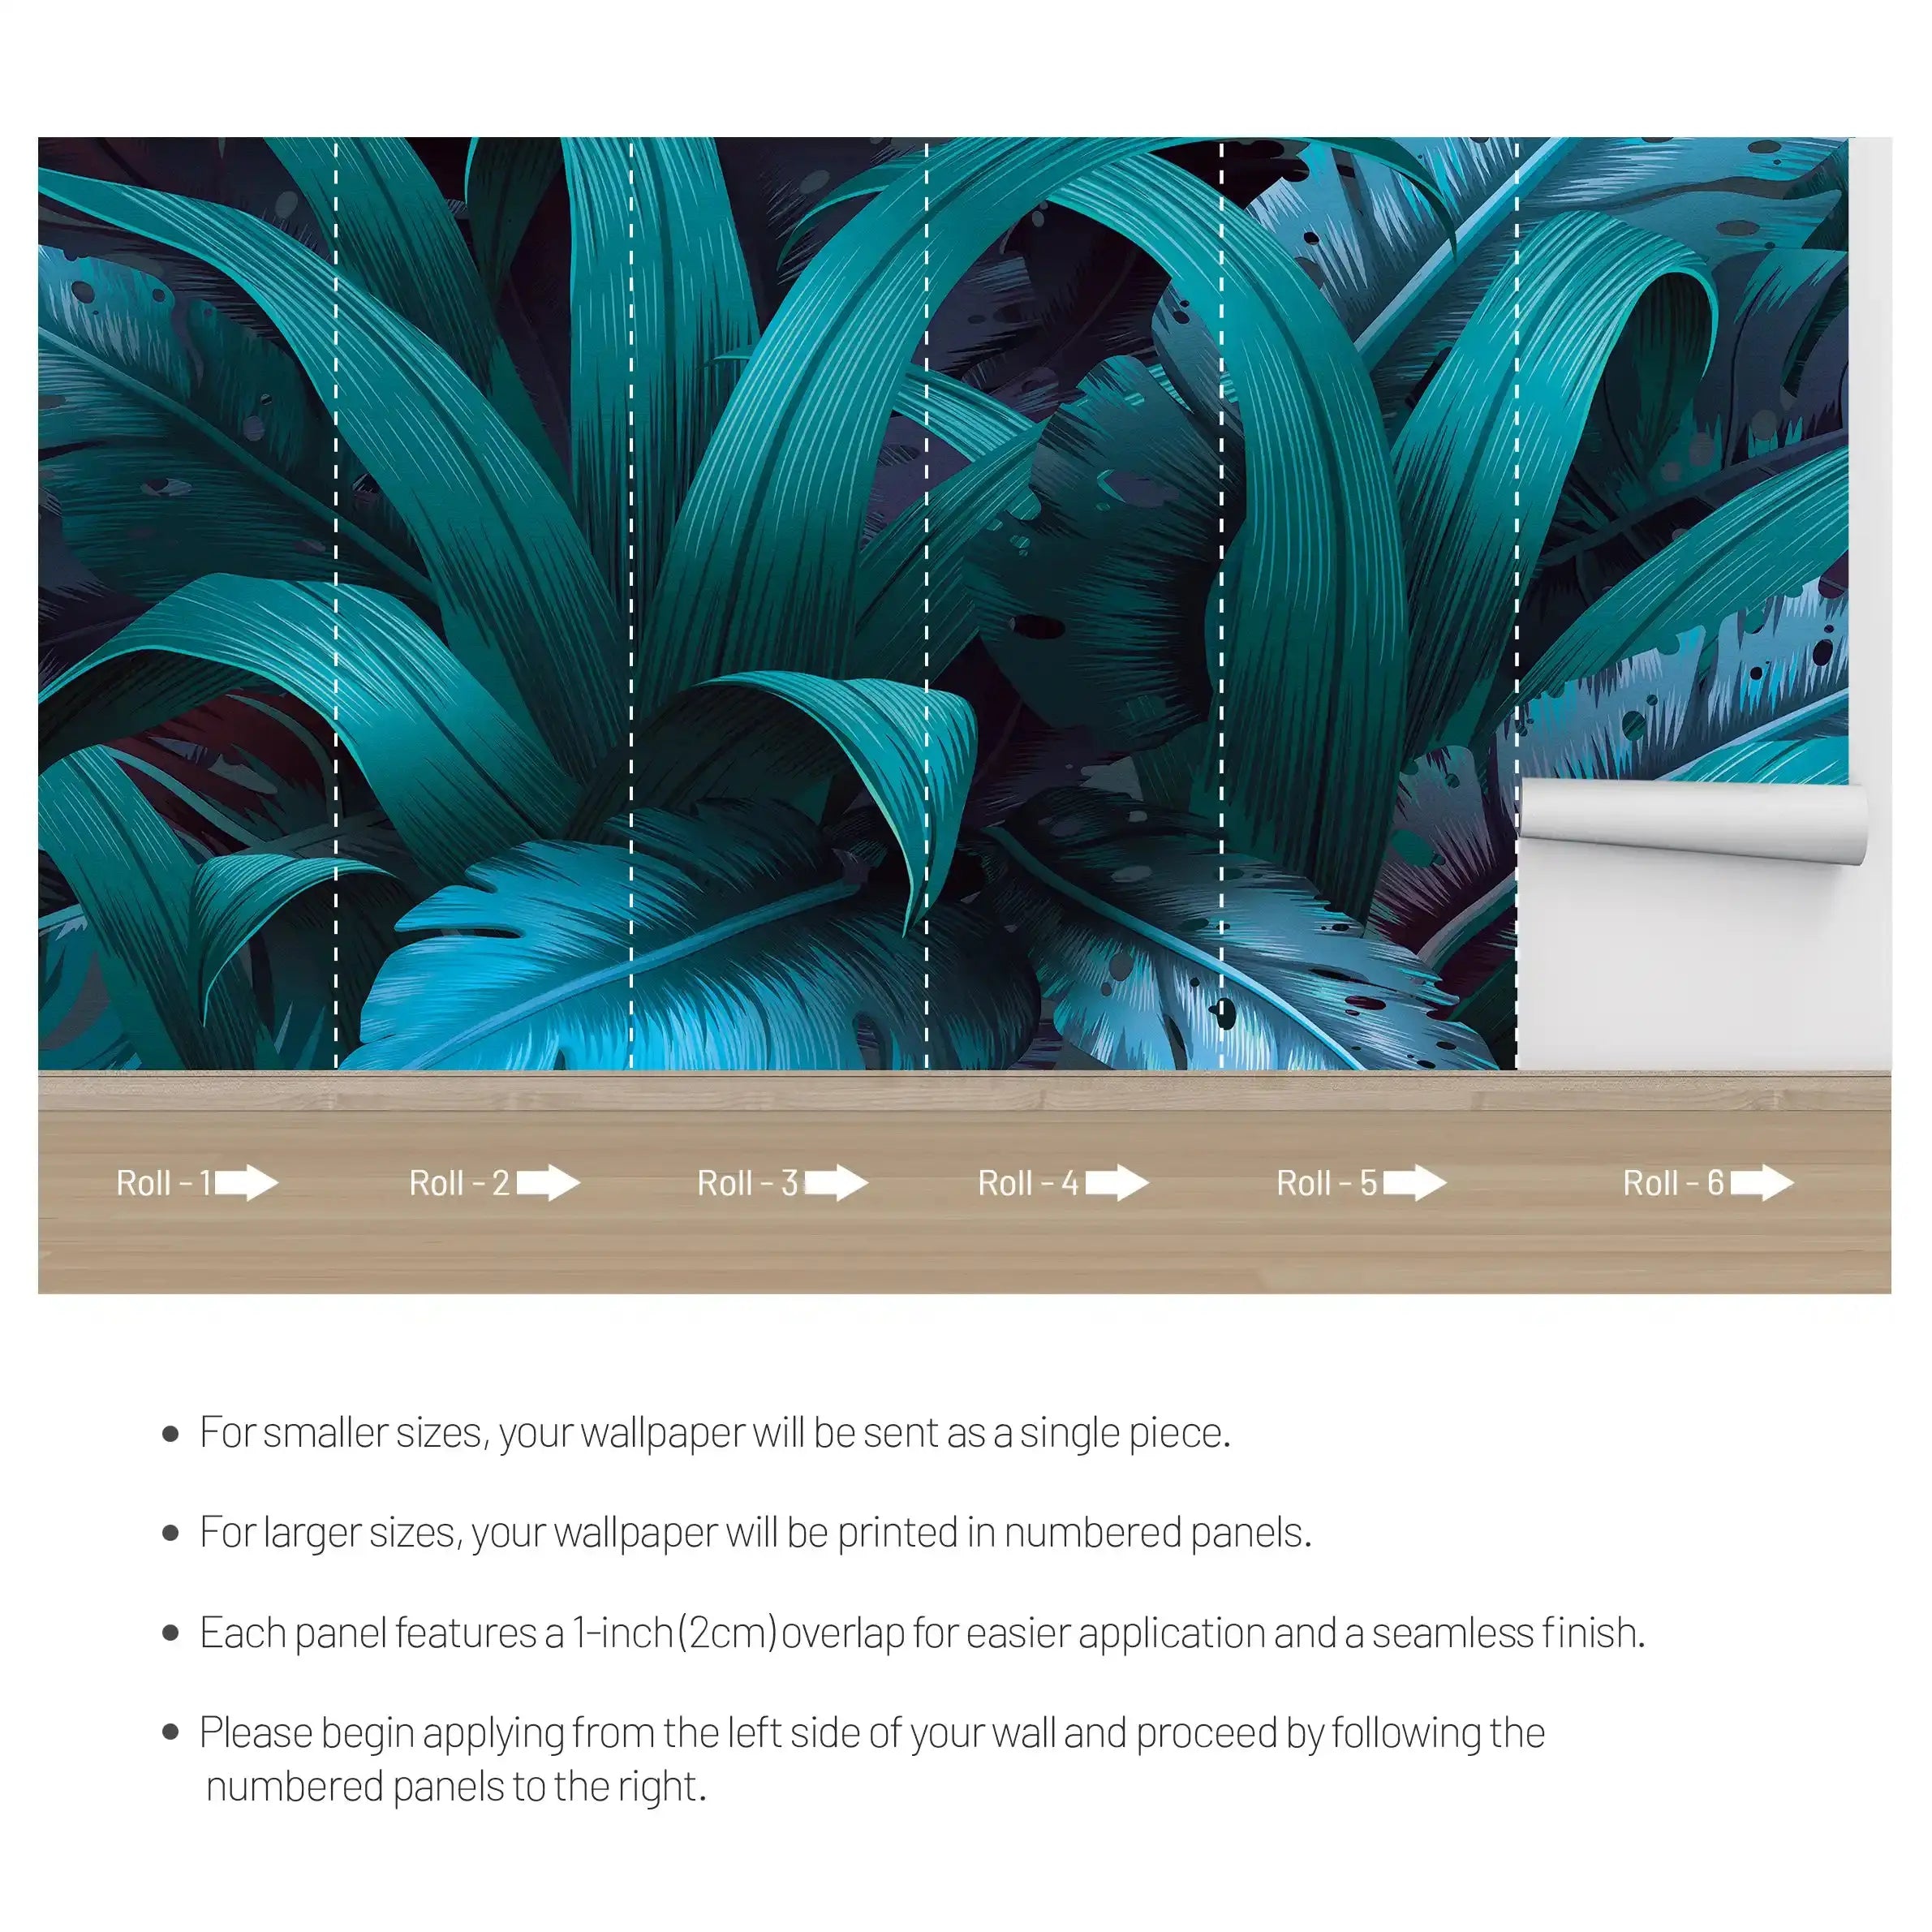 3049-C / Turquoise Jungle Peel and Stick Mural - Temporary Wallpaper, Tropical Rainforest, Easy Install Wallpaper for Wall Decor, DIY Decor, and Room Decor - Artevella